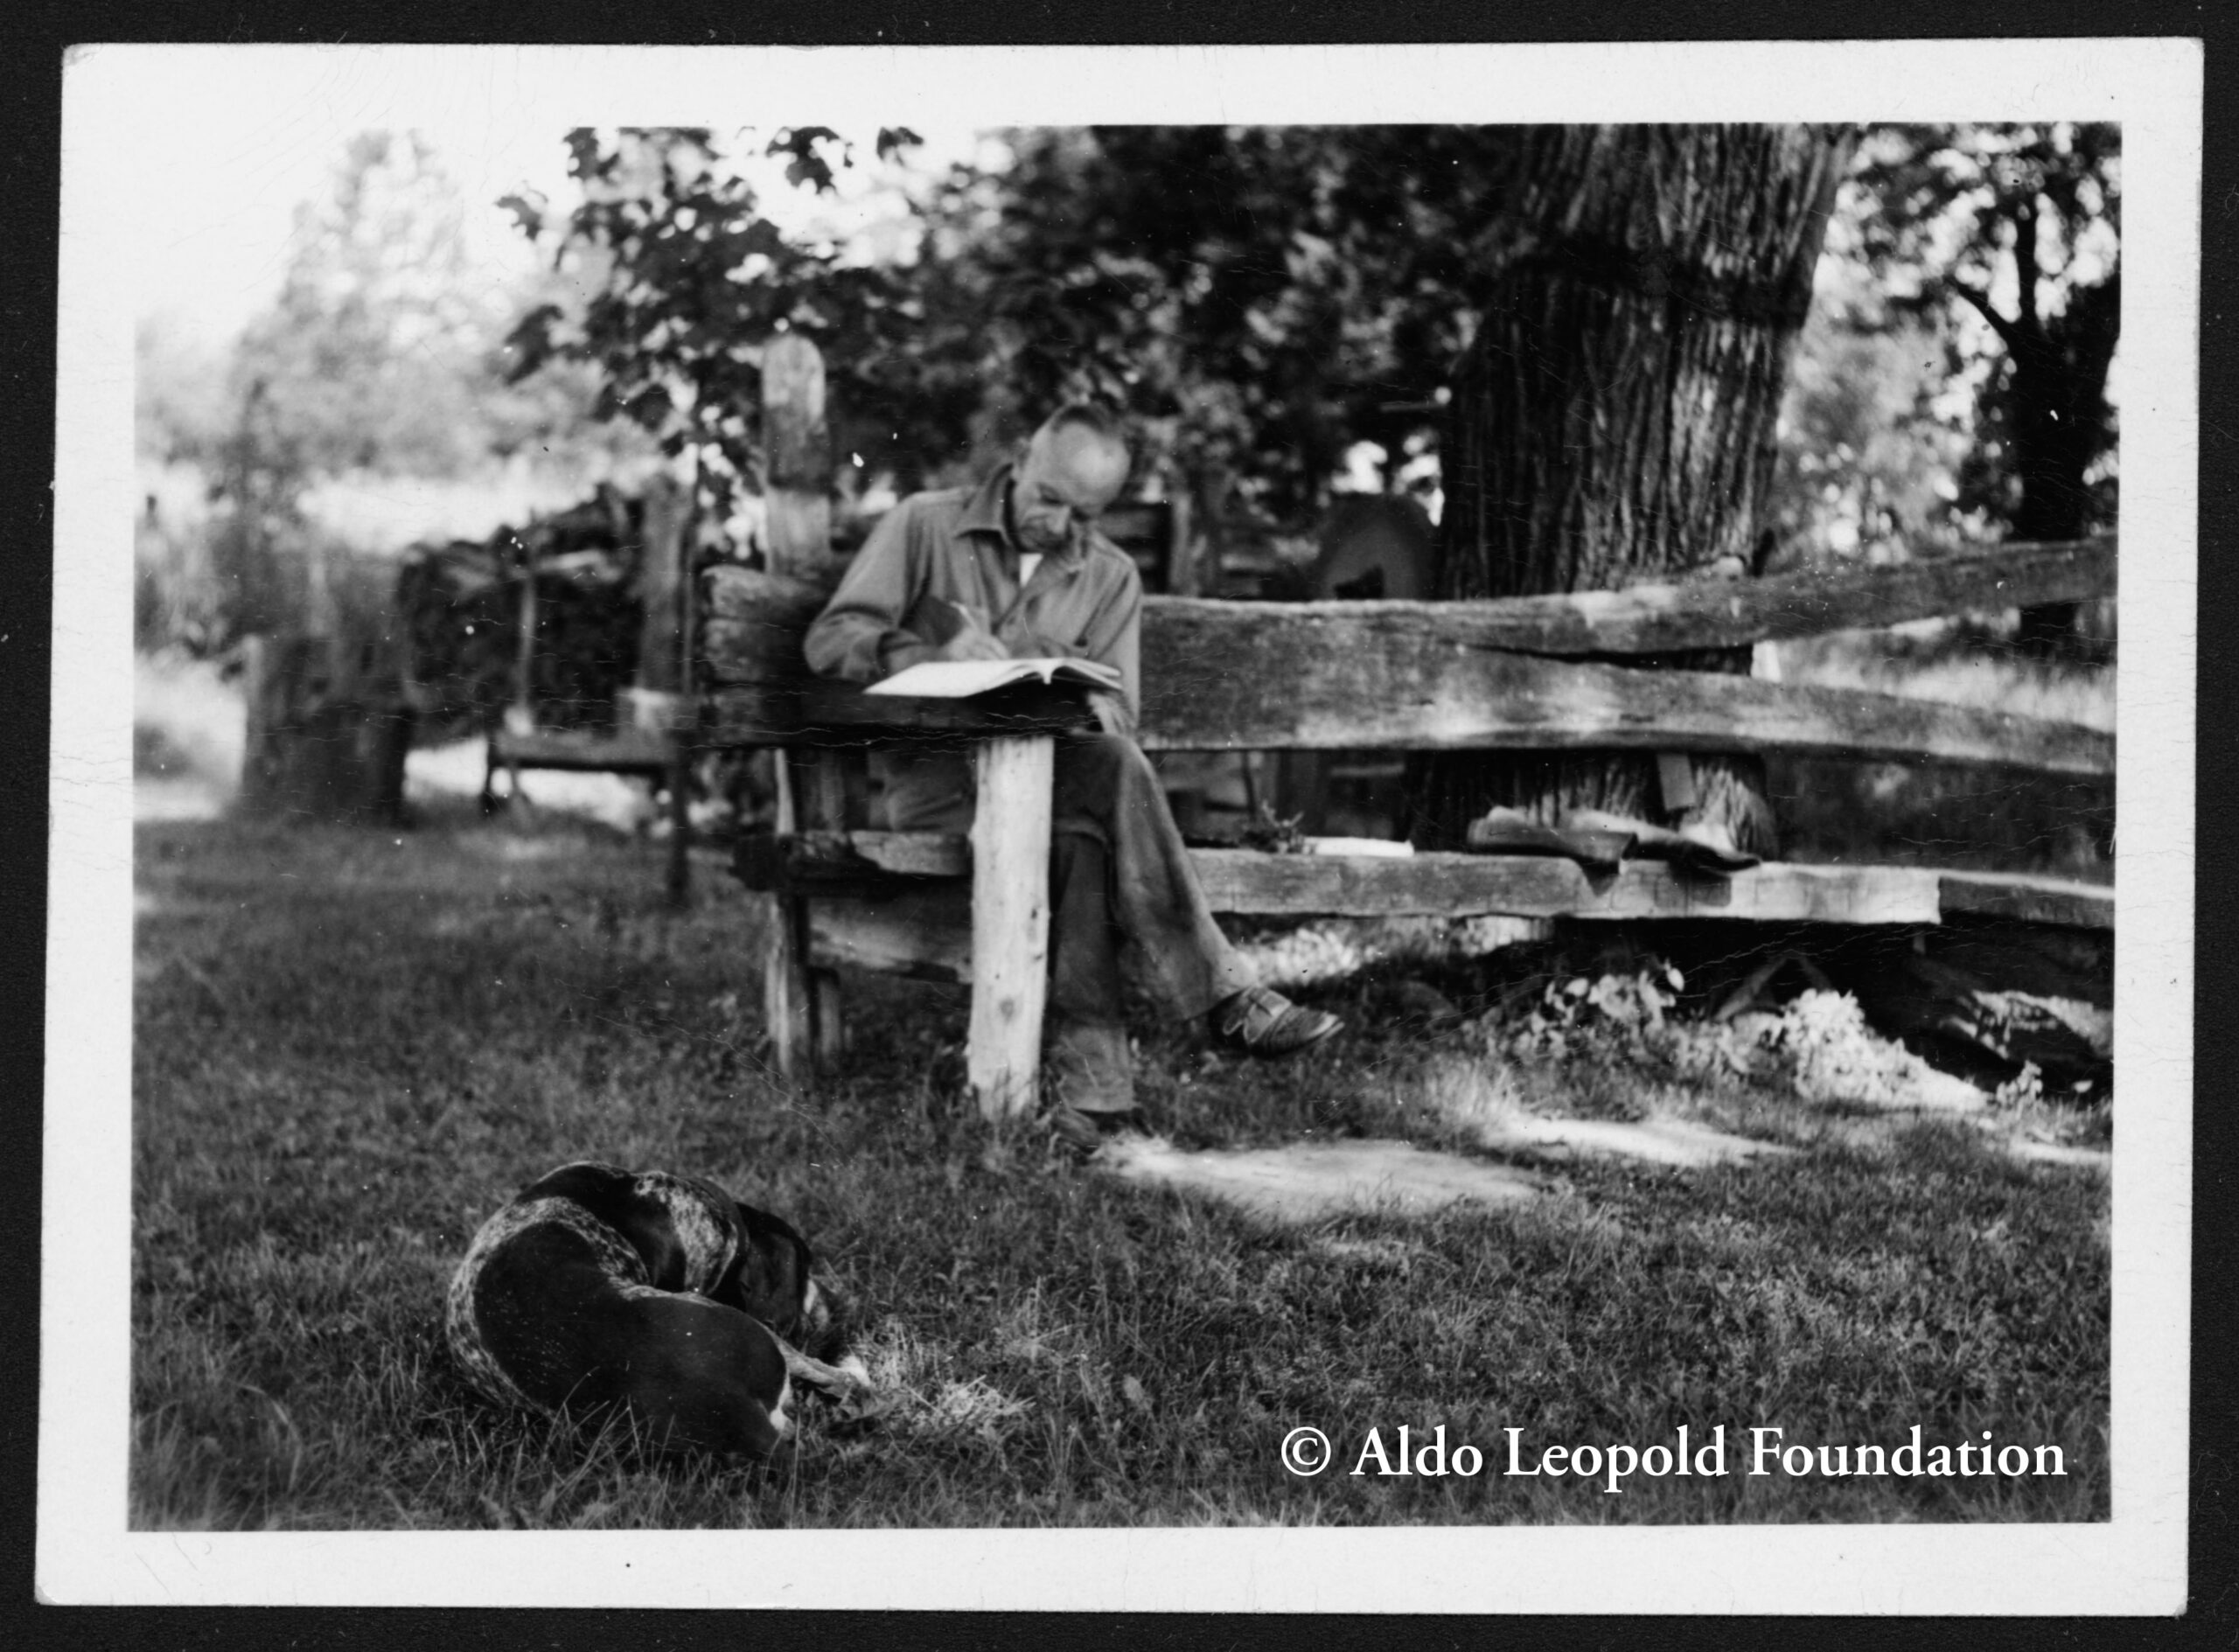 Aldo Leopold at the Shack with his dog, Flick